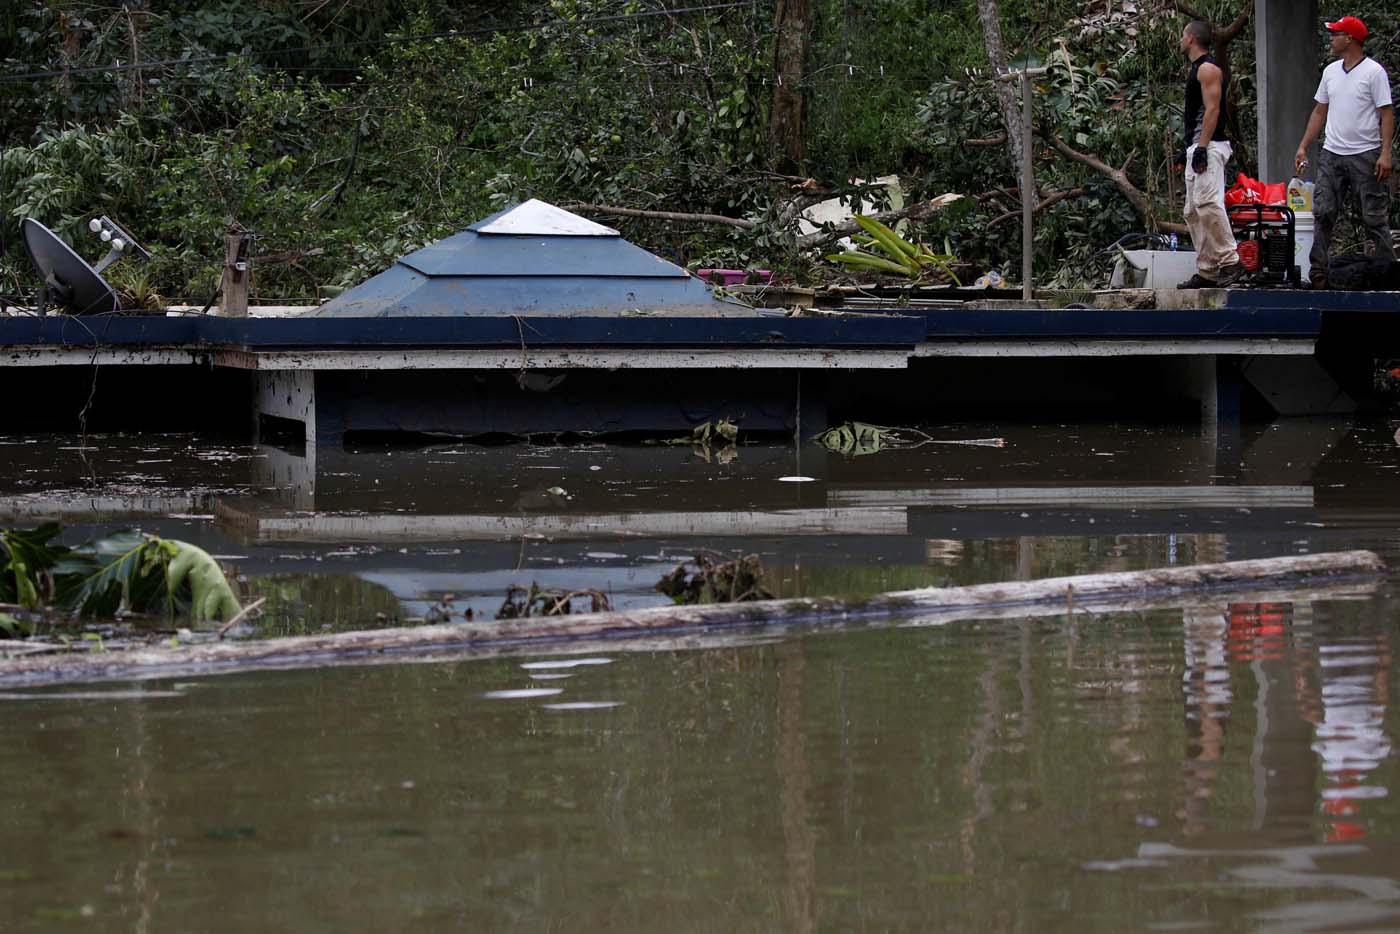 Men stand at the roof of a house submerged by flood waters close to the dam of the Guajataca lake after the area was hit by Hurricane Maria in Guajataca, Puerto Rico September 23, 2017. REUTERS/Carlos Garcia Rawlins